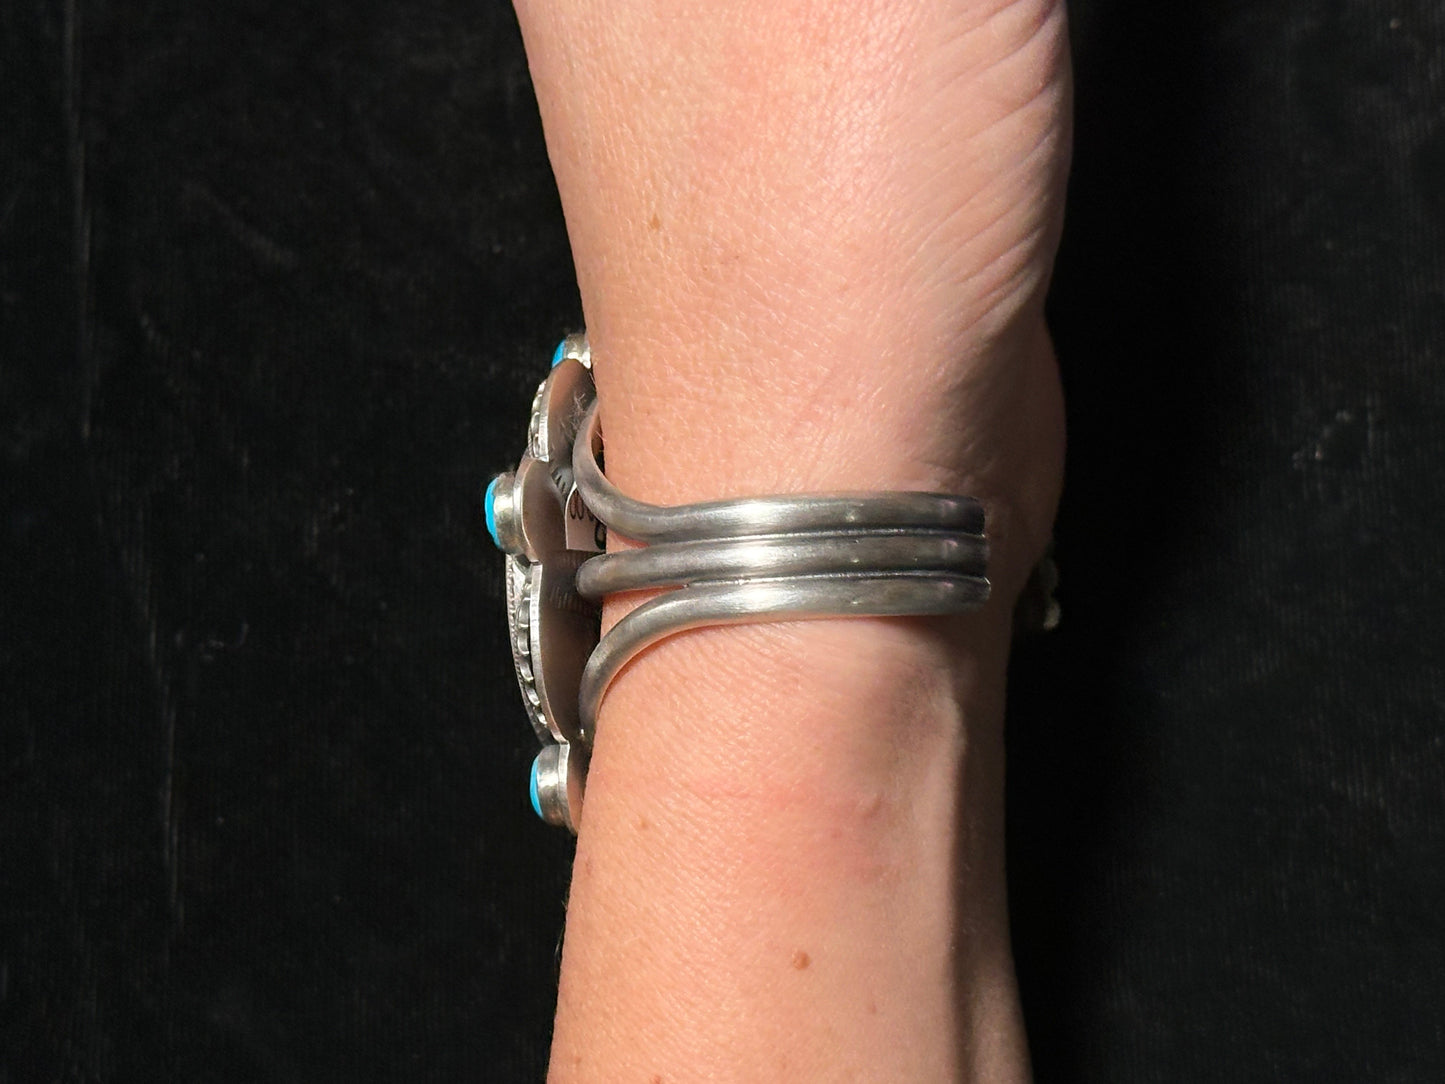 6"-7" 1923 Peace Silver Dollar and Sleeping Beauty Turquoise Cuff Bracelet